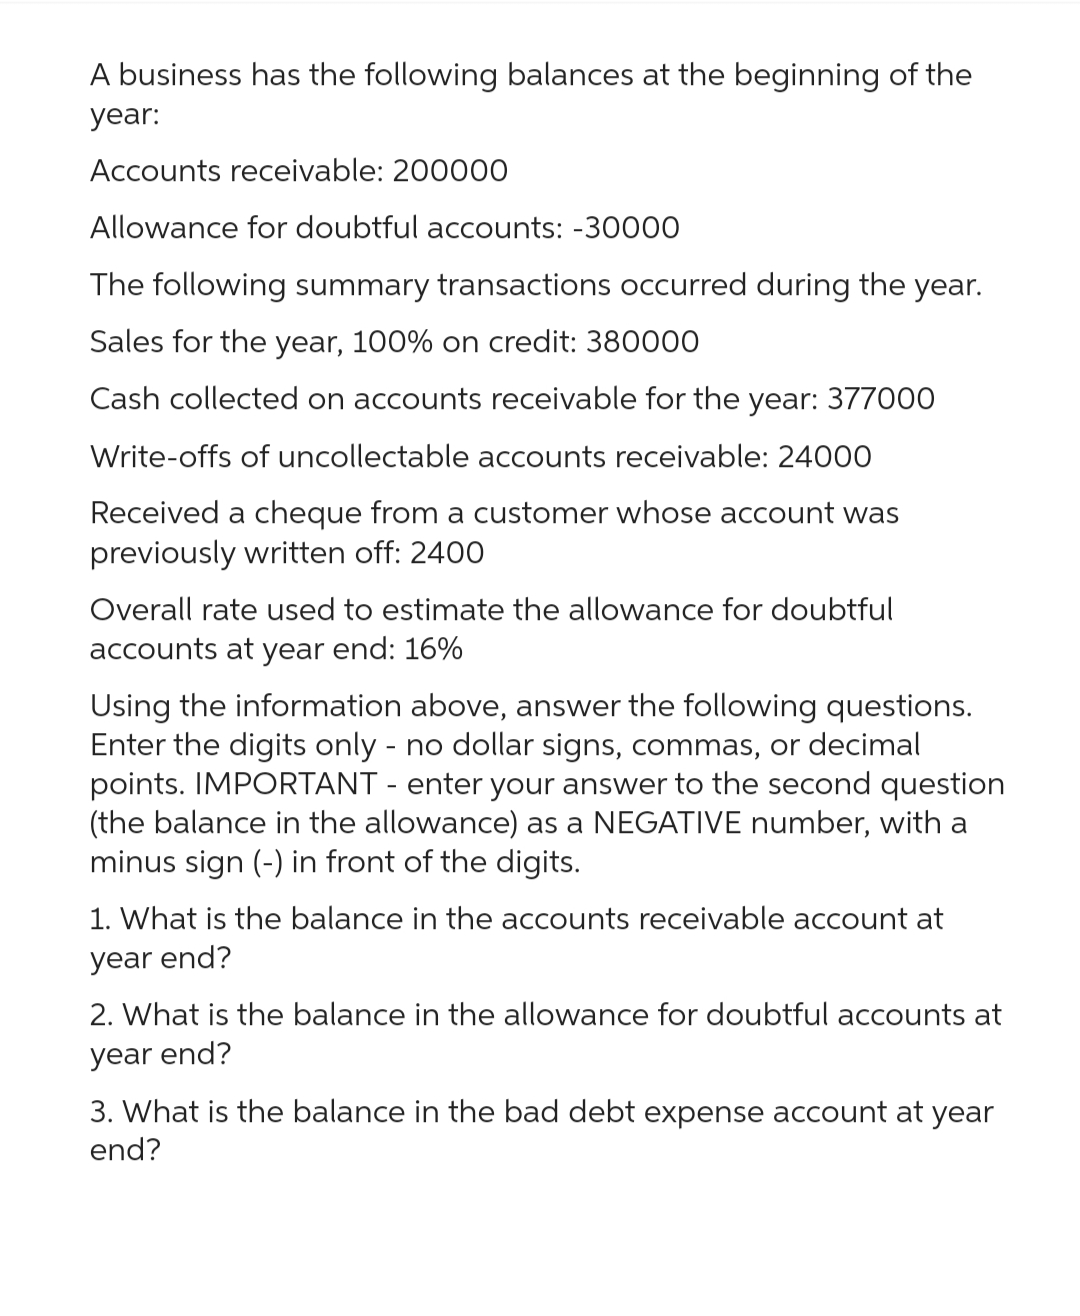 A business has the following balances at the beginning of the
year:
Accounts receivable: 200000
Allowance for doubtful accounts: -30000
The following summary transactions occurred during the year.
Sales for the year, 100% on credit: 380000
Cash collected on accounts receivable for the year: 377000
Write-offs of uncollectable accounts receivable: 24000
Received a cheque from a customer whose account was
previously written off: 2400
Overall rate used to estimate the allowance for doubtful
accounts at year end: 16%
Using the information above, answer the following questions.
Enter the digits only - no dollar signs, commas, or decimal
points. IMPORTANT - enter your answer to the second question
(the balance in the allowance) as a NEGATIVE number, with a
minus sign (-) in front of the digits.
1. What is the balance in the accounts receivable account at
year end?
2. What is the balance in the allowance for doubtful accounts at
year end?
3. What is the balance in the bad debt expense account at year
end?